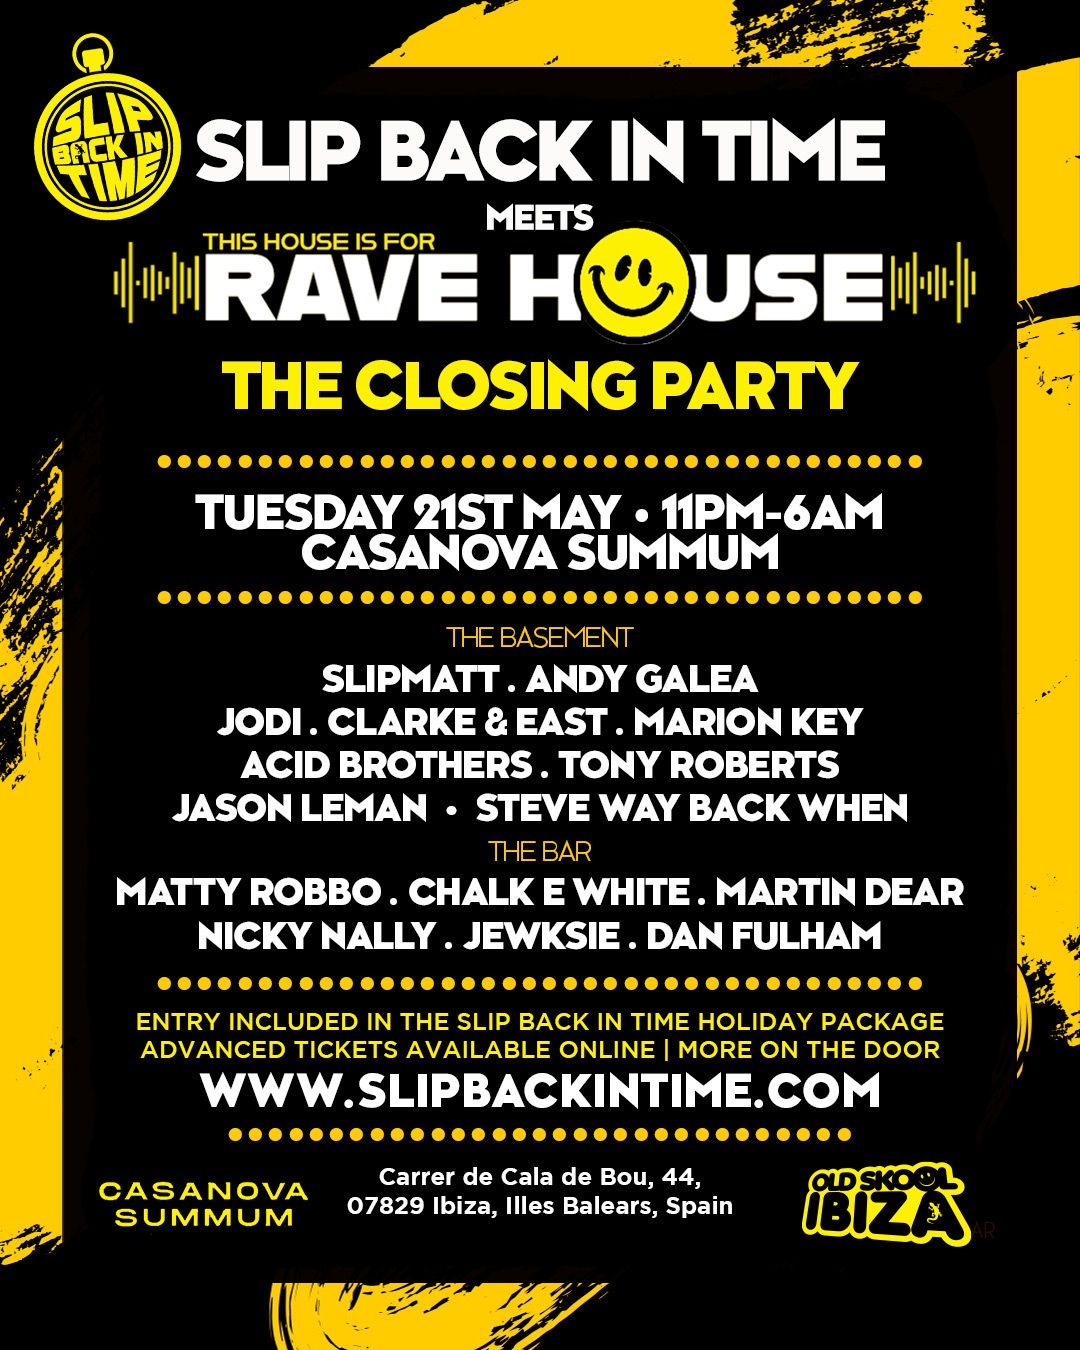 Slip Back In Time meets This House Is For Rave House - The Closing Party